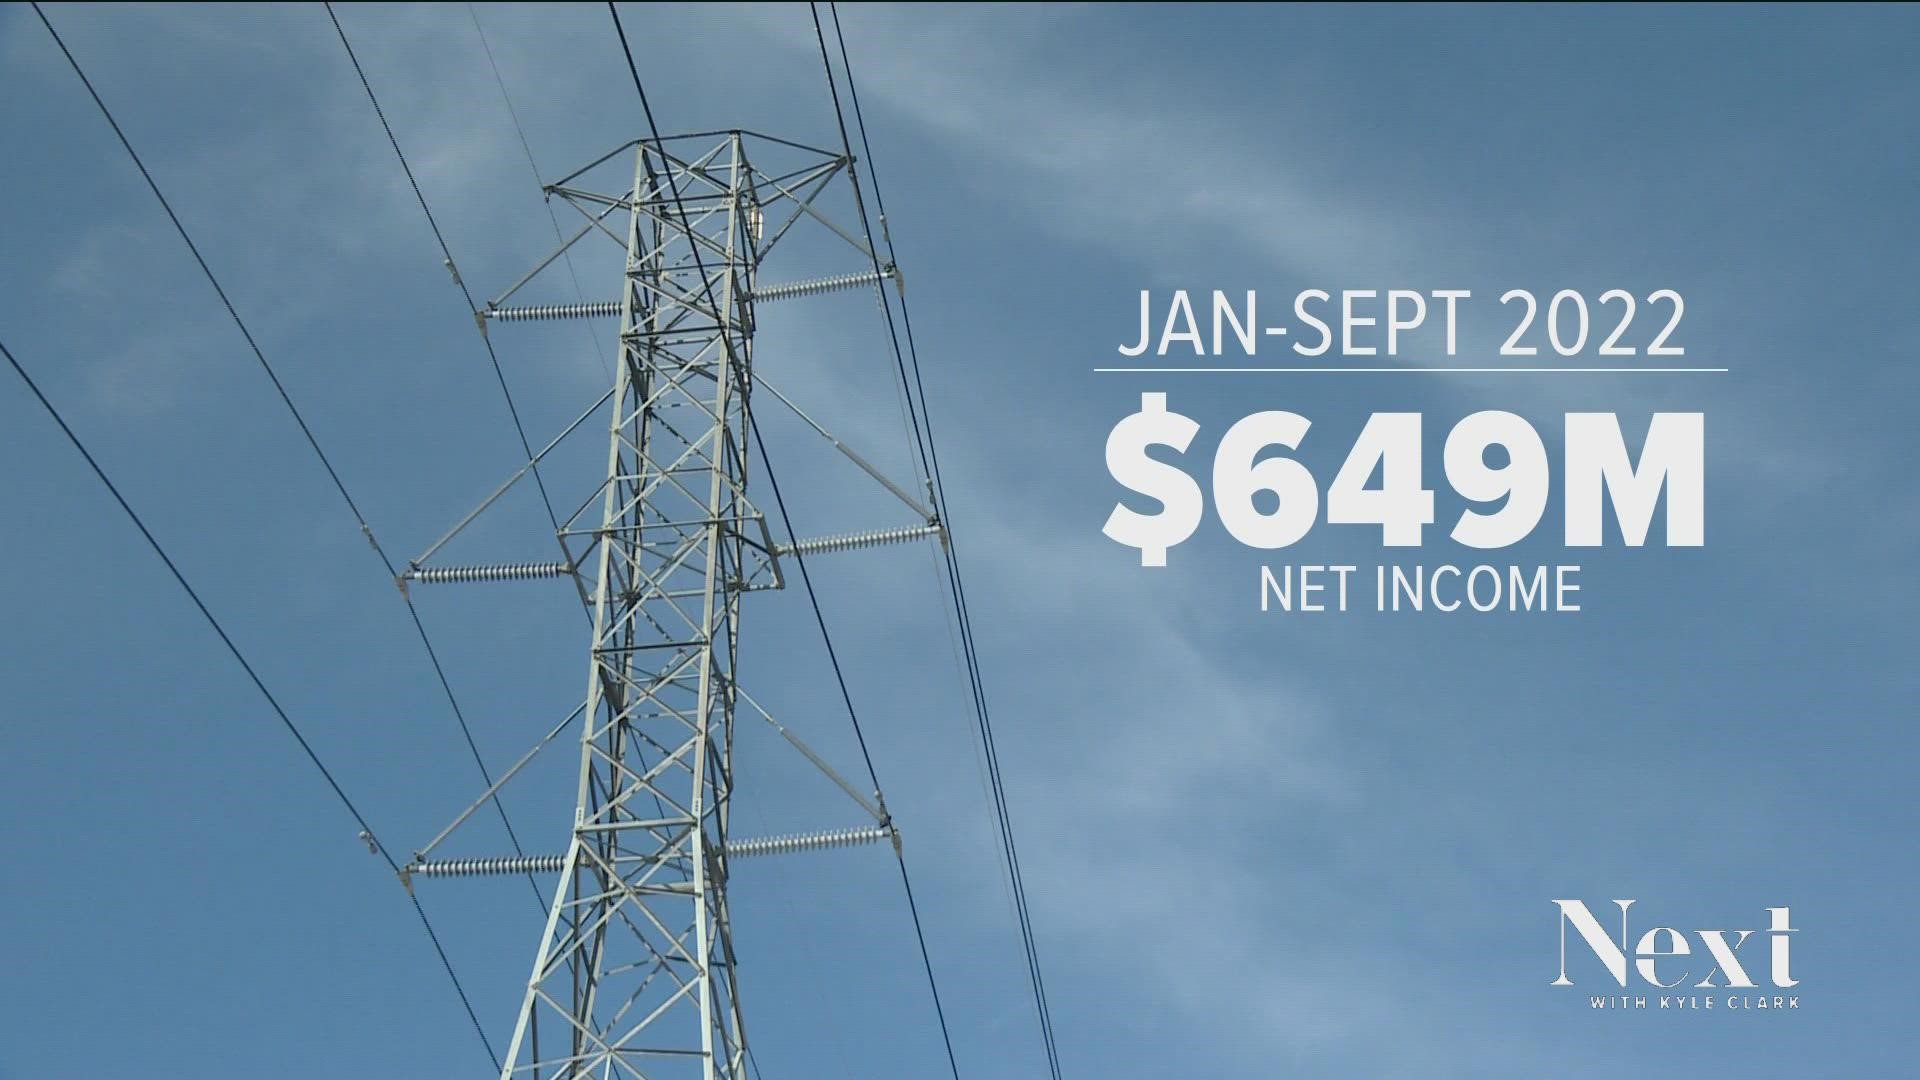 The Public Utilities Commission held a meeting on Wednesday that included an explanation of why customers' bills have increased.